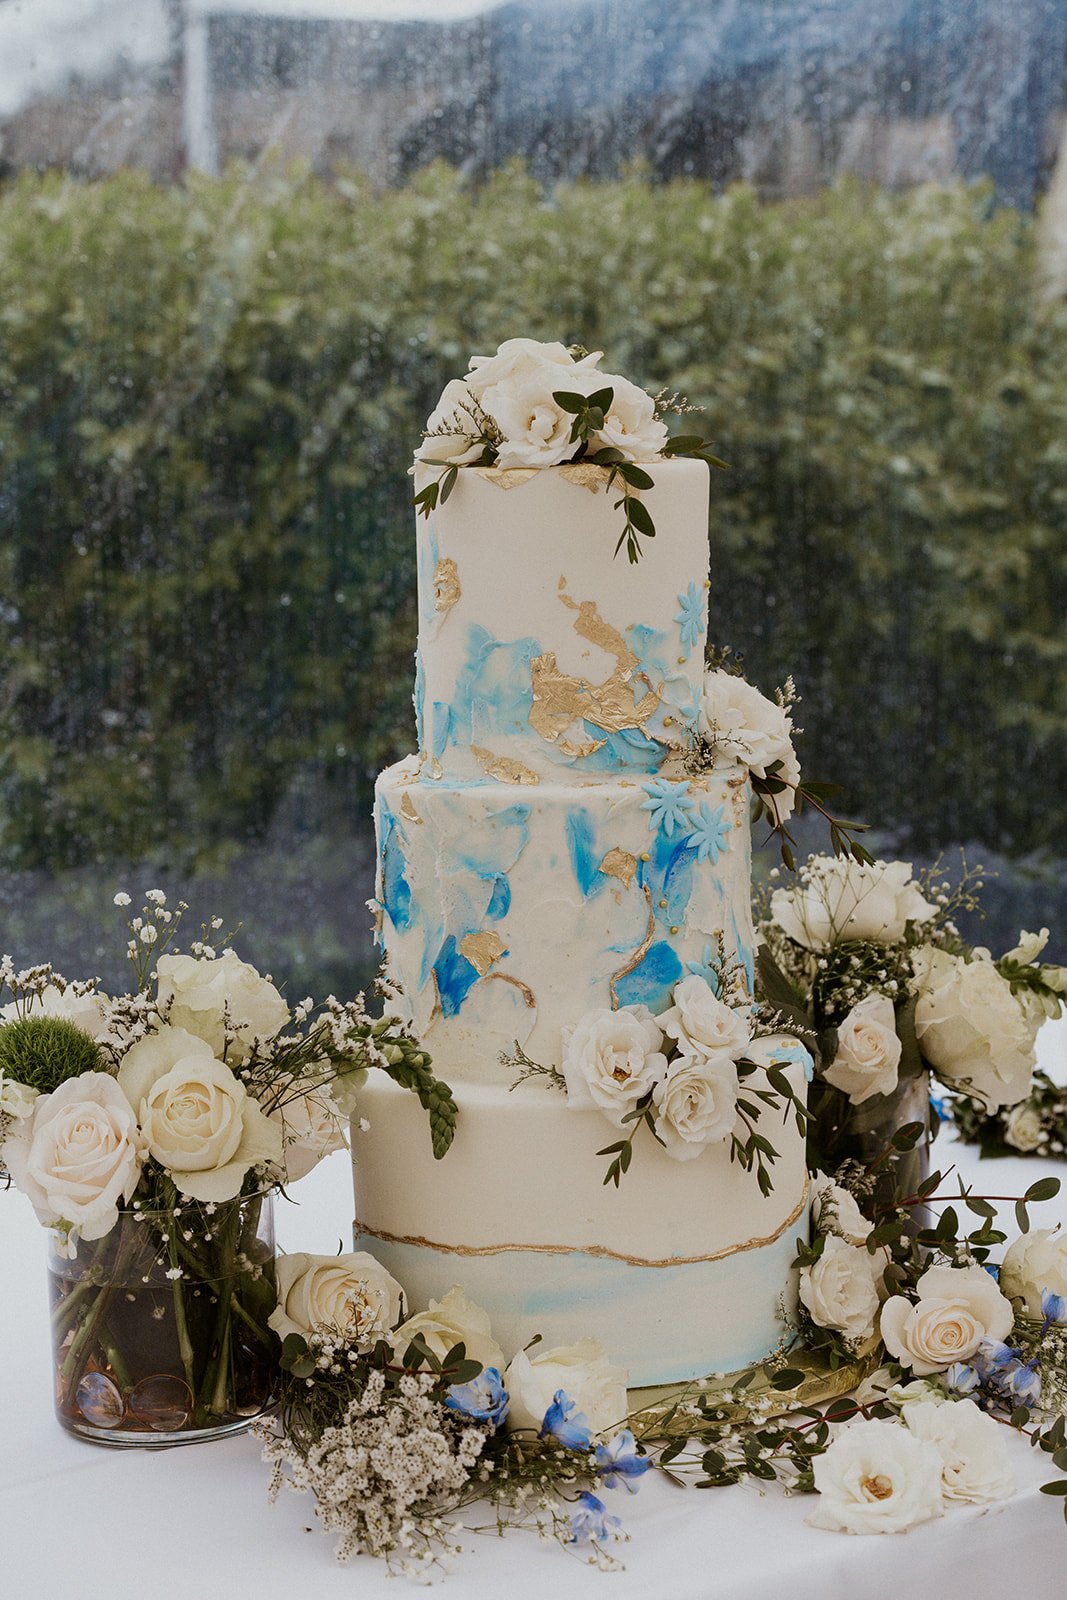 Bride and Grooms wedding cake dressed with florals, touches of blue and gold throughout the three tier cake.